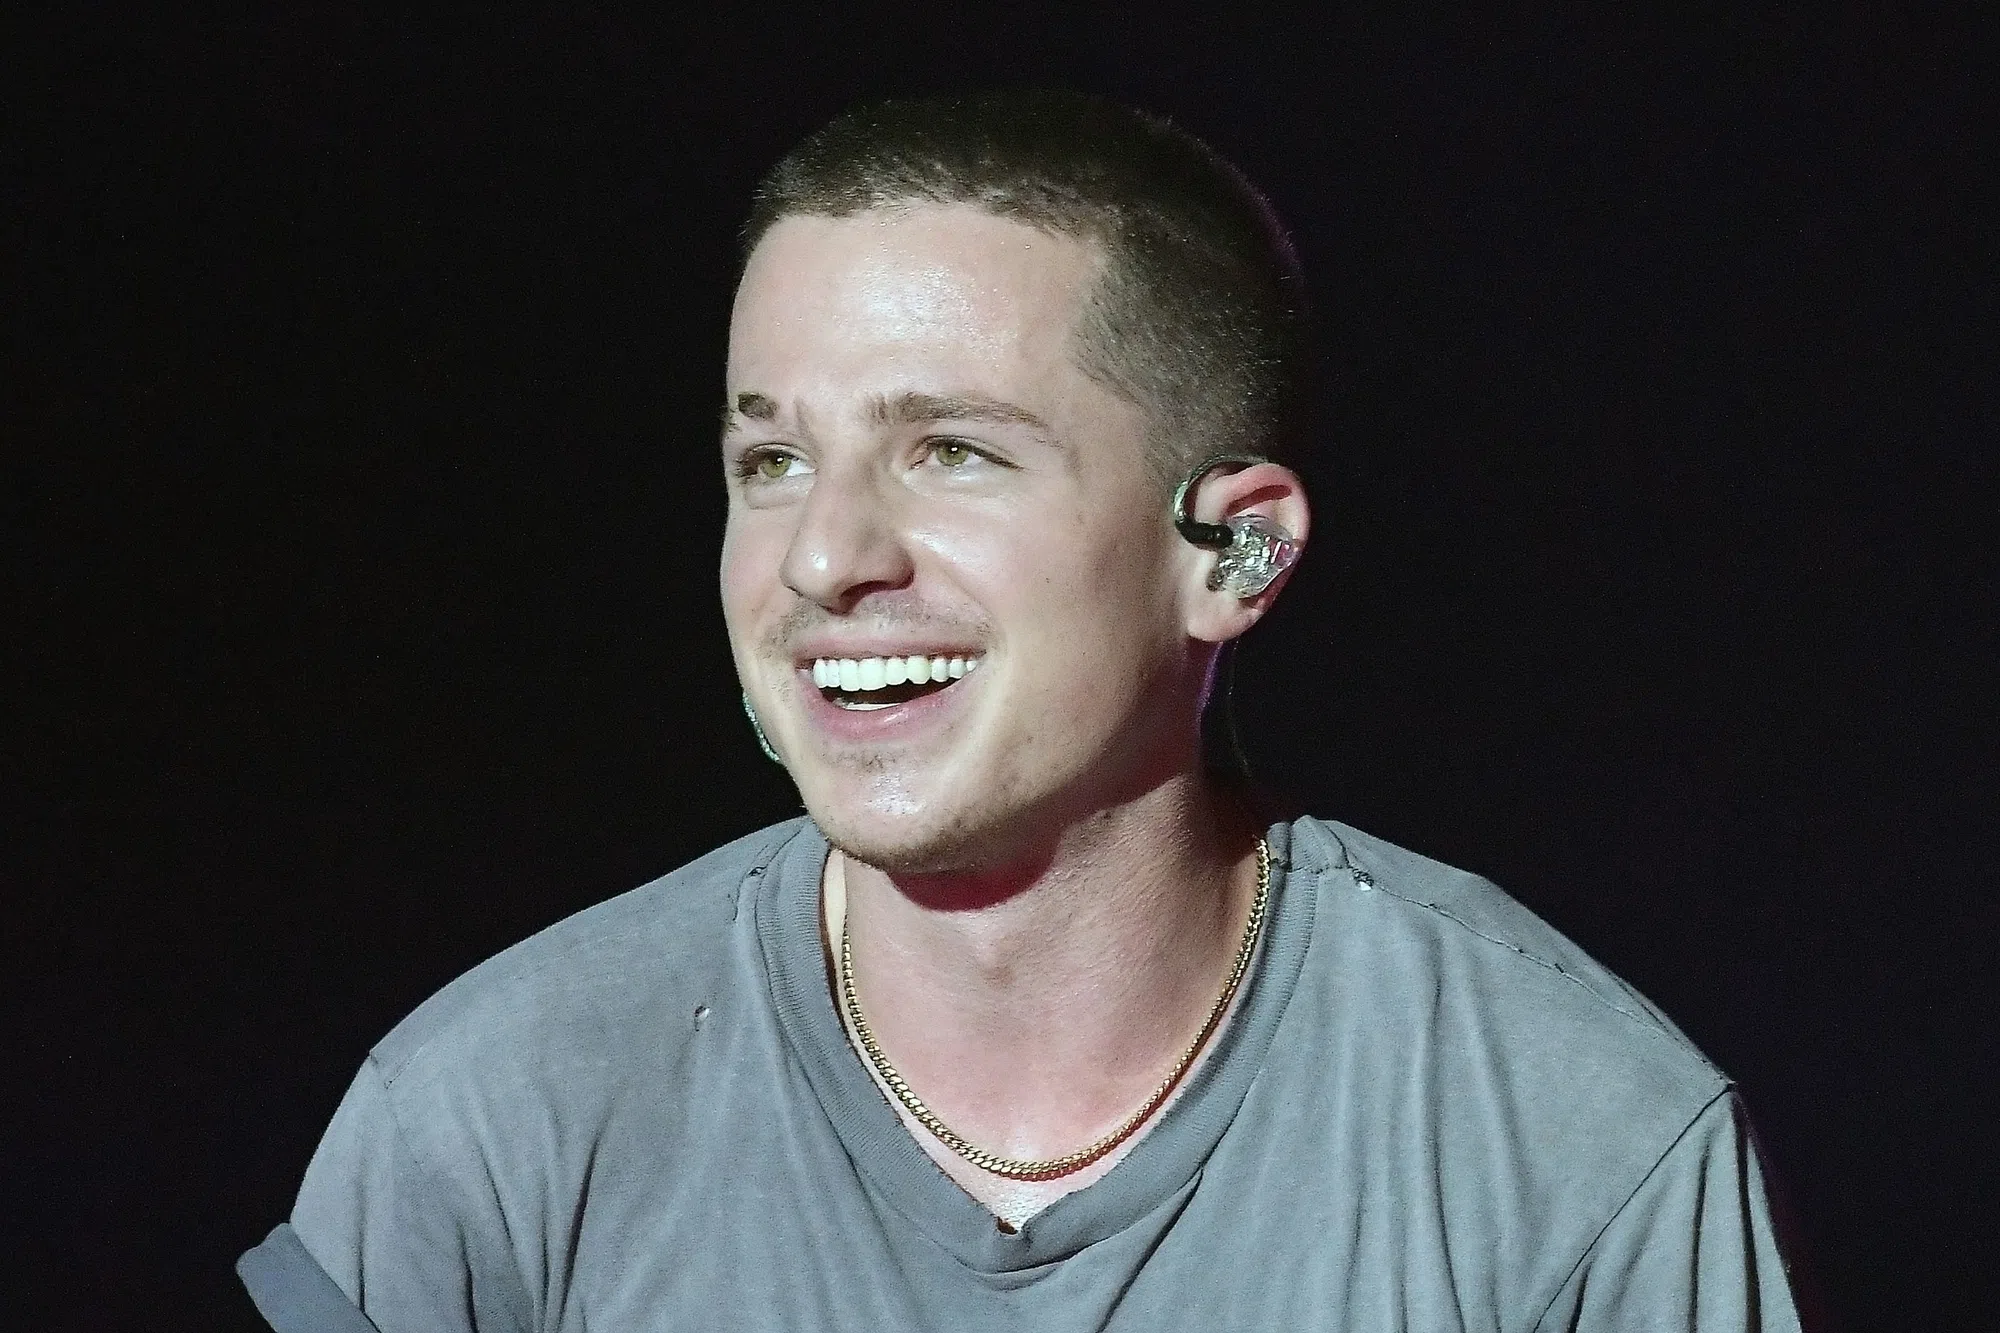 ICYMI: Charlie Puth Is Seemingly Taking Taylor Swift's Lyrical Shout-Out as a 'Sign' to Release New Single [VIDEO]